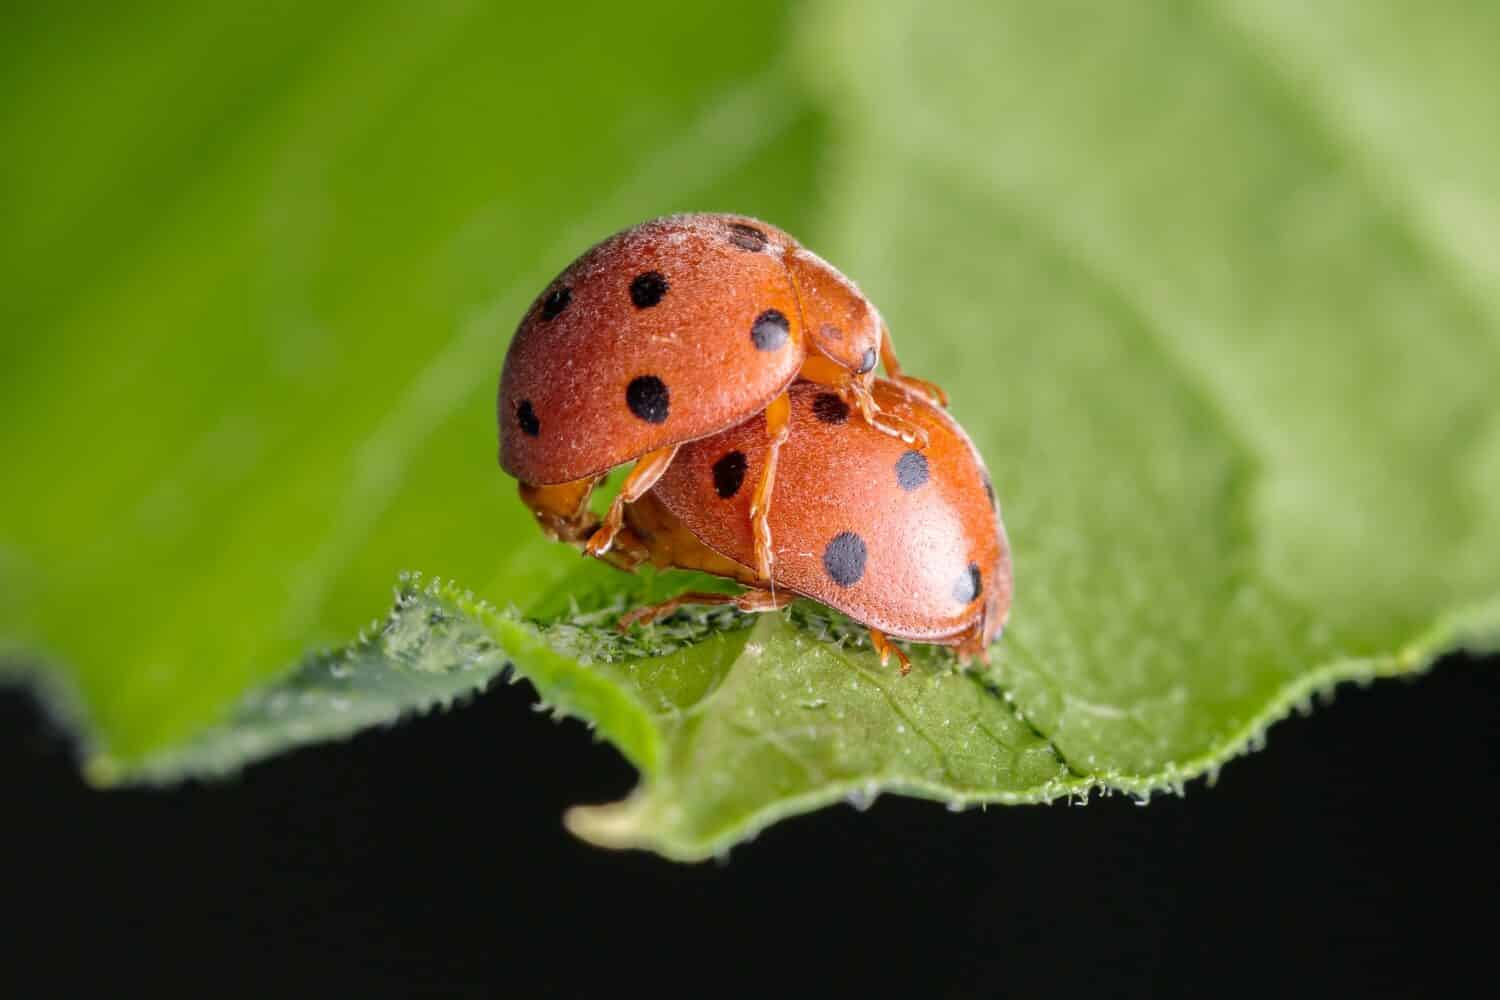 The bryony ladybird, known as the “melon ladybug” in the south of France, Henosepilachna argus